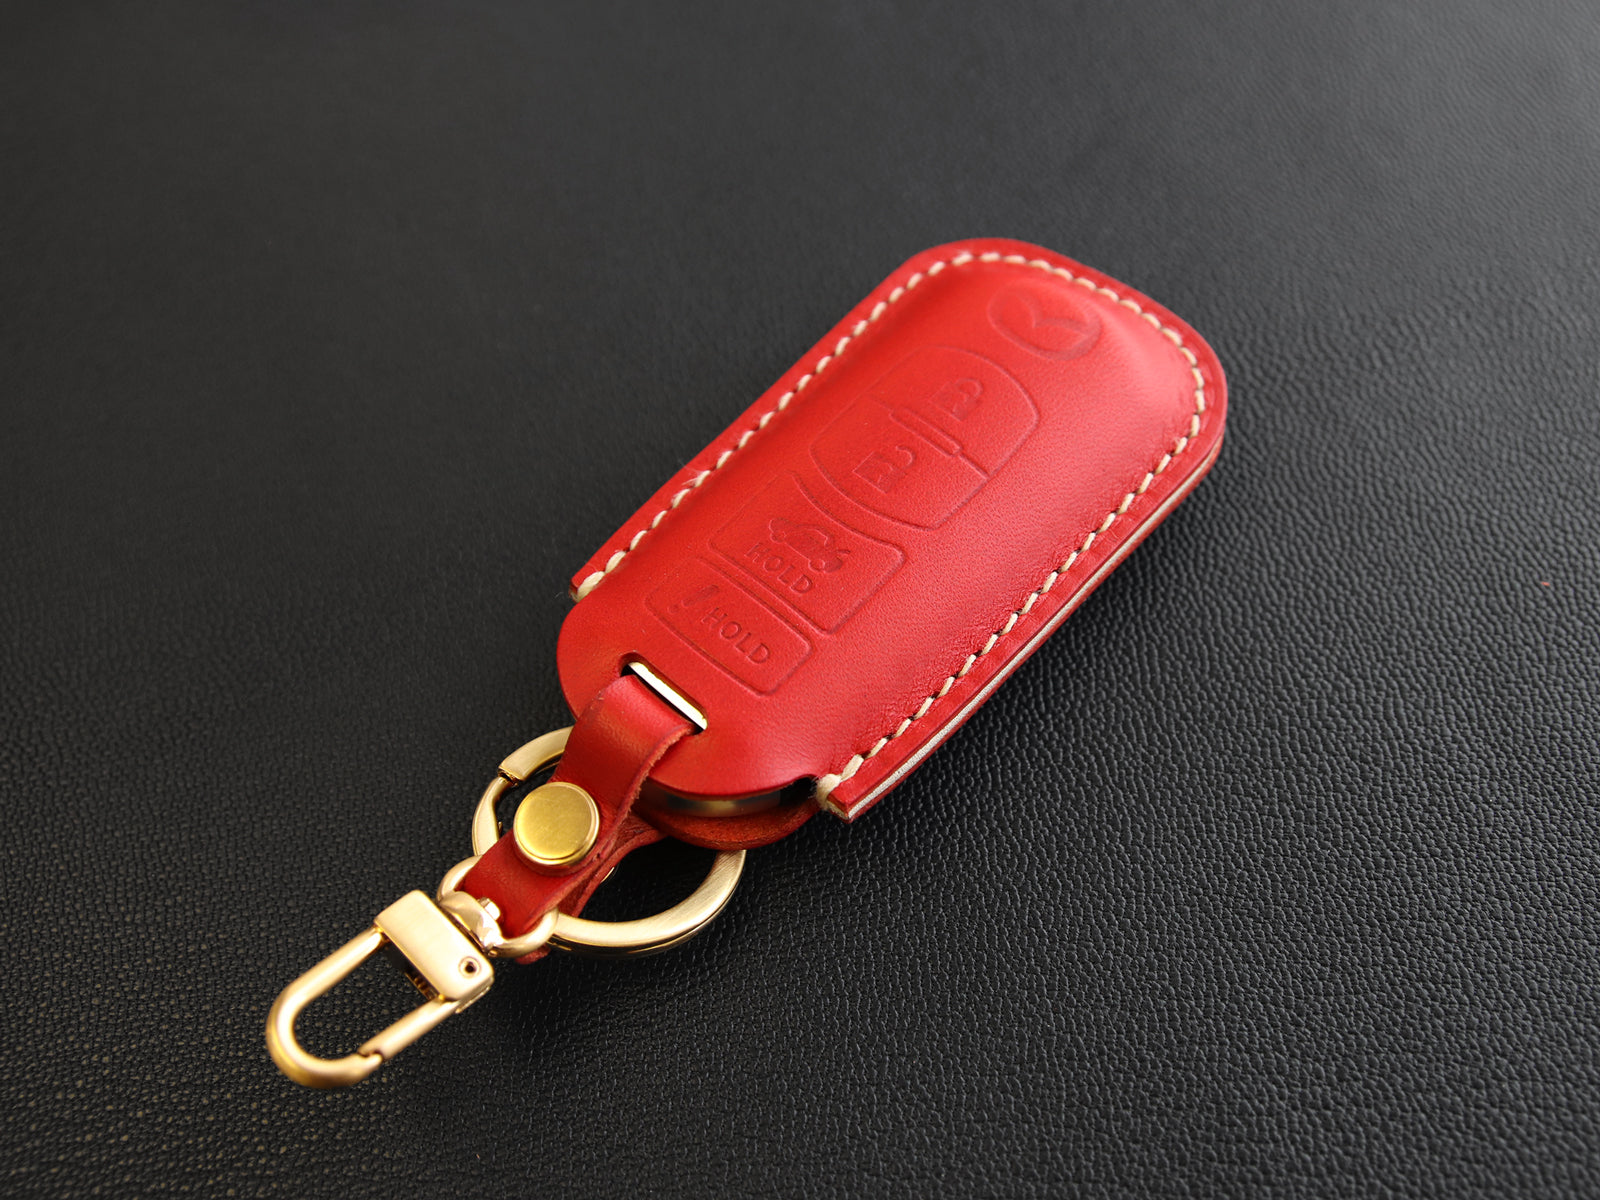 Mazda Key Fob Cover Case Leather Keyless Entry for Mazda – Leather Brut